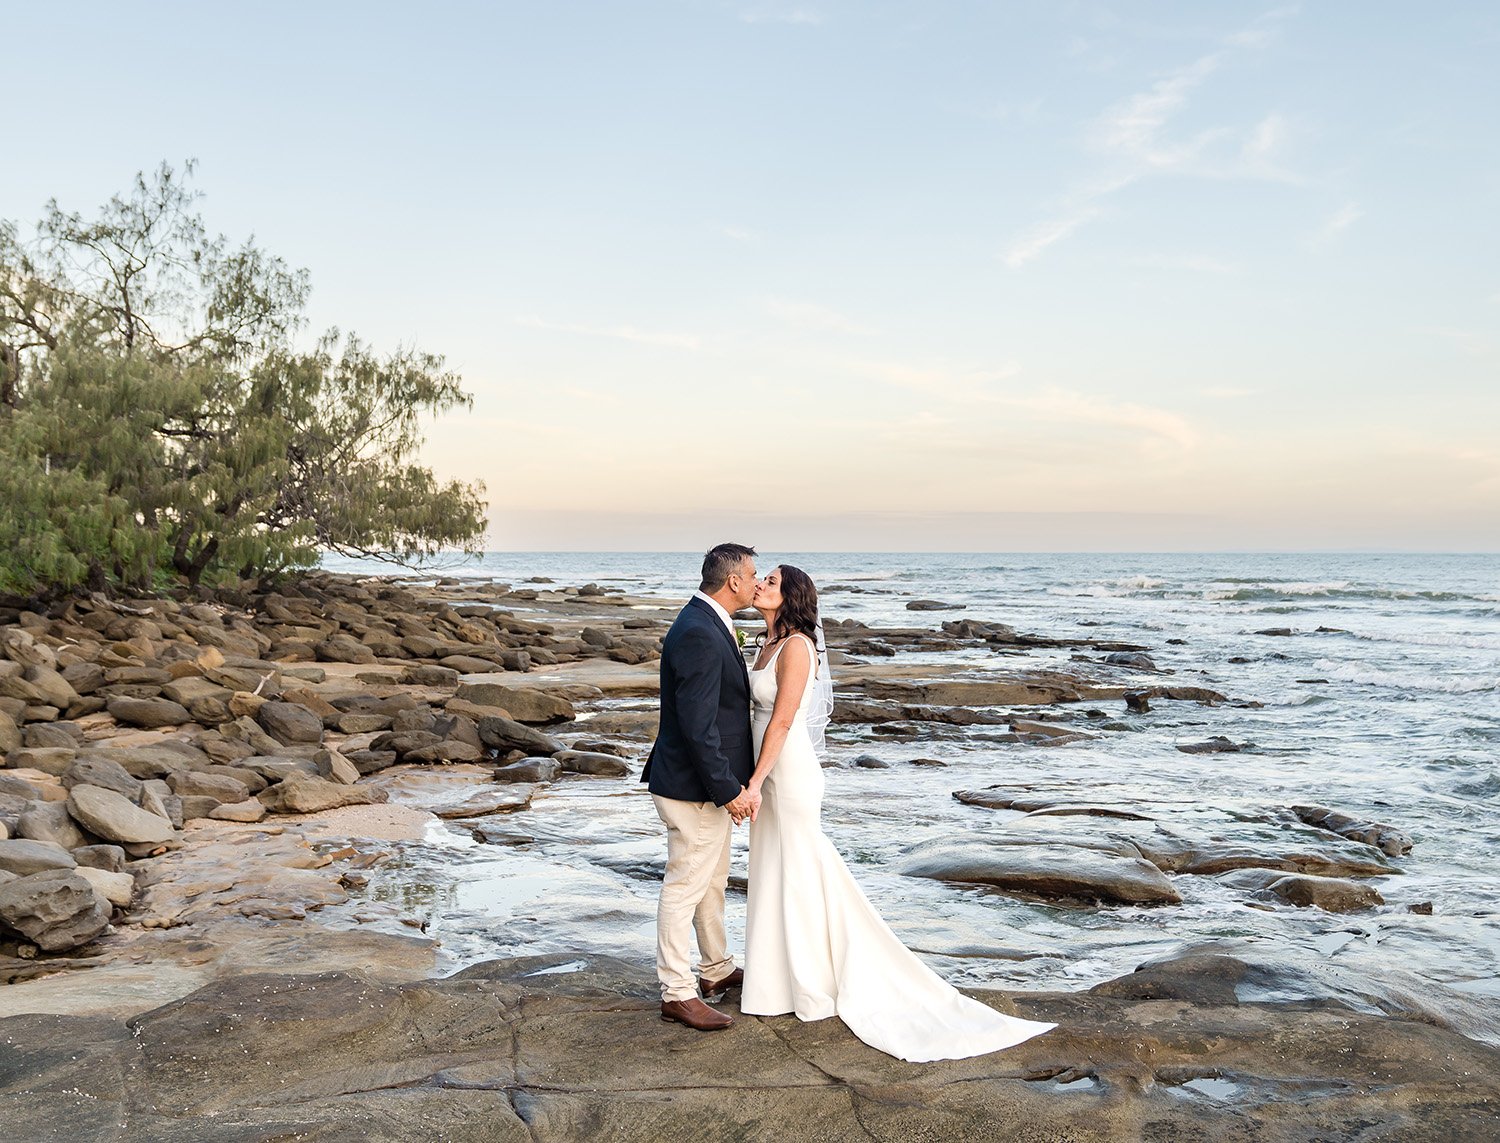 Marli 💗 Paul

Congrats Marli &amp; Paul on tying the knot at Kings Beach, Caloundra!  Seriously, the Sunshine Coast was at her best with the ocean looking so inviting, like it was cheering them on in the background. Here's to a lifetime of love, lau